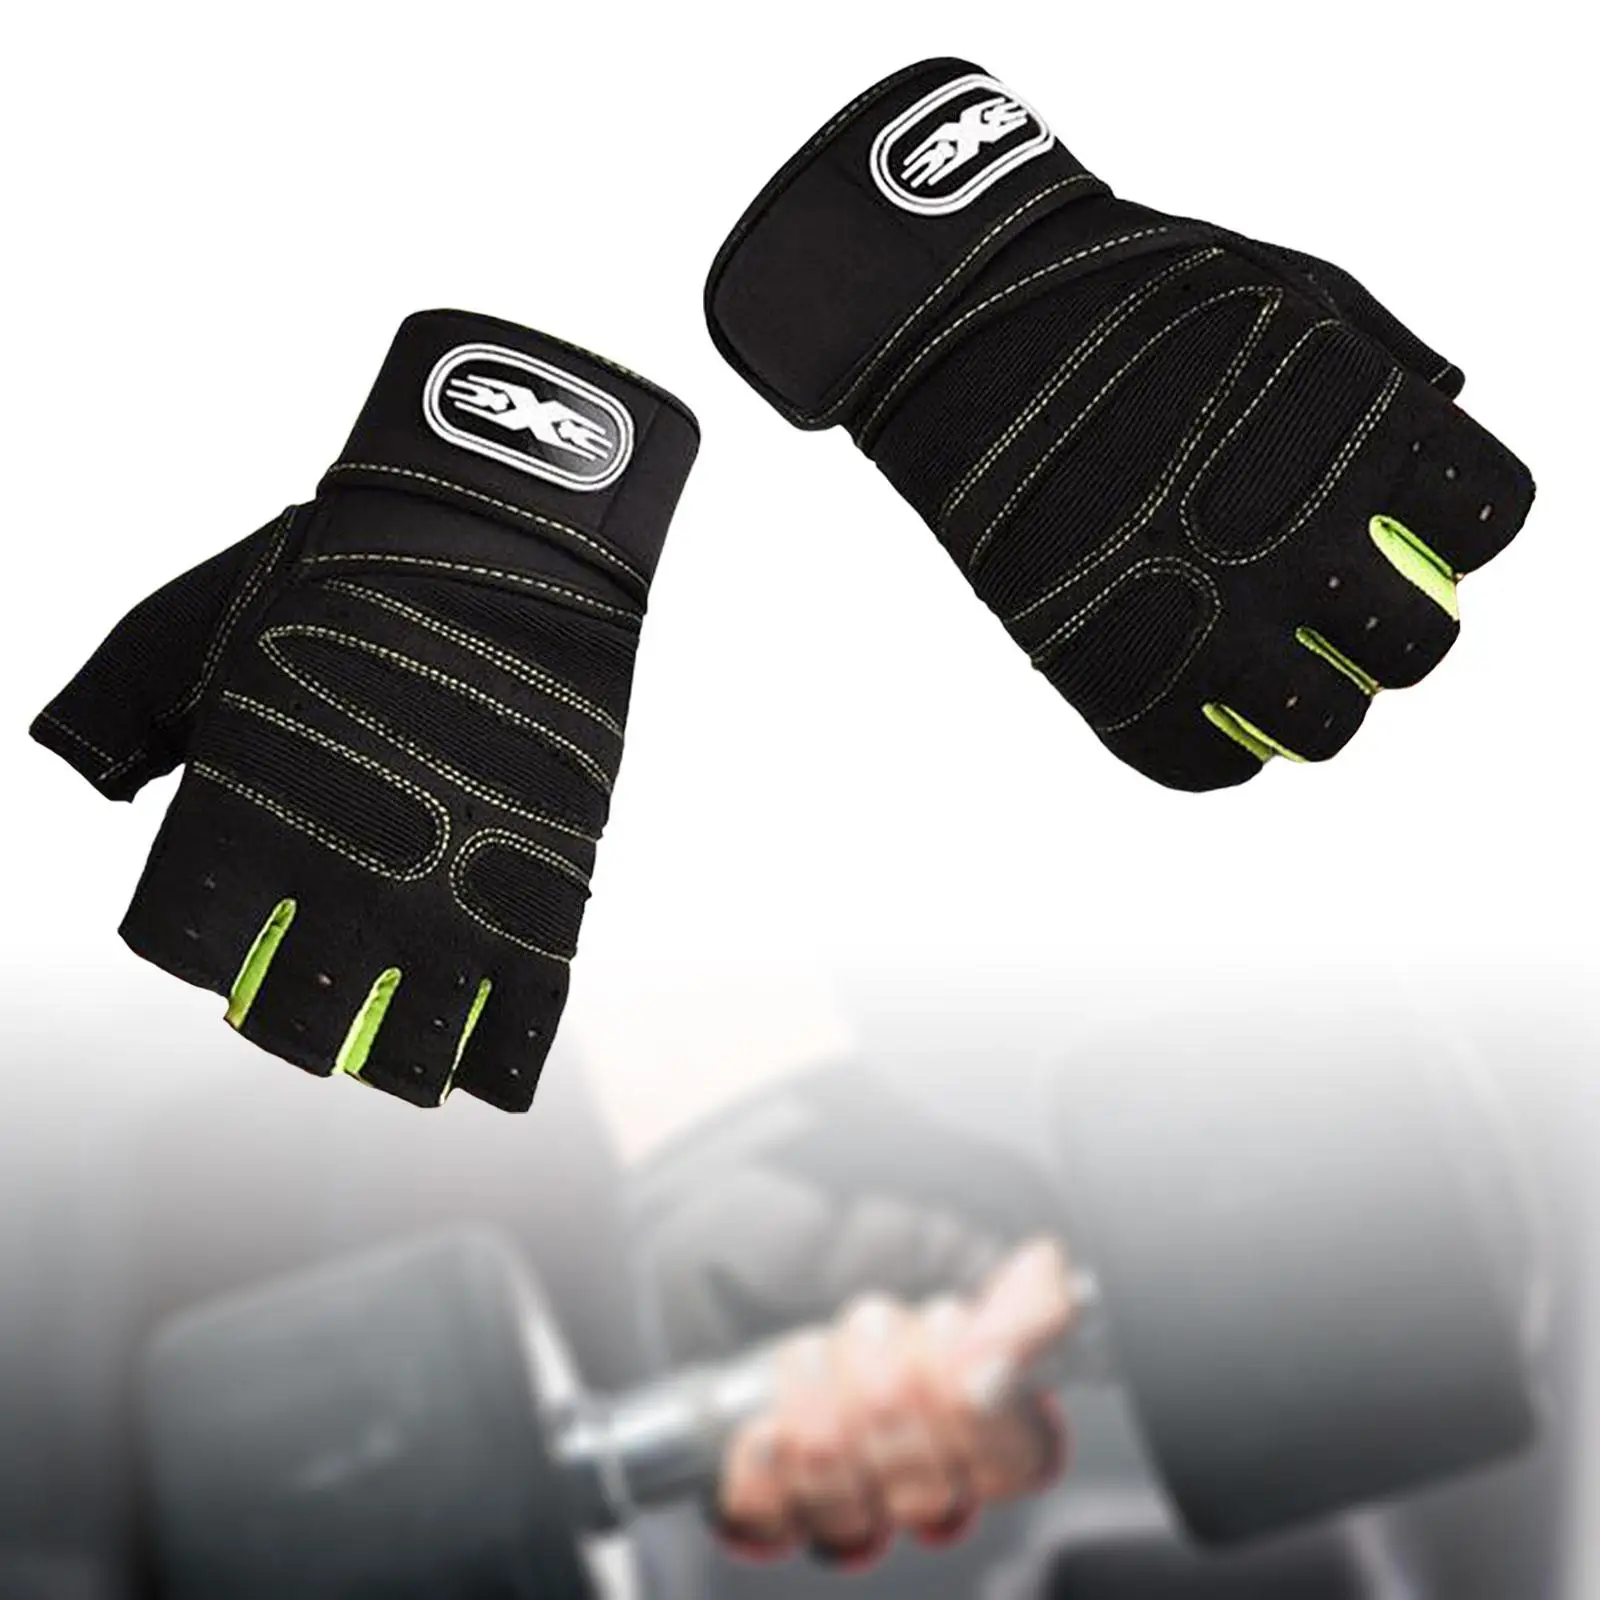 Weight Lifting Gloves Palm Protection Nonslip Wrist Support Gloves for Powerlifting Fitness Pull Ups Workout Dumbbell